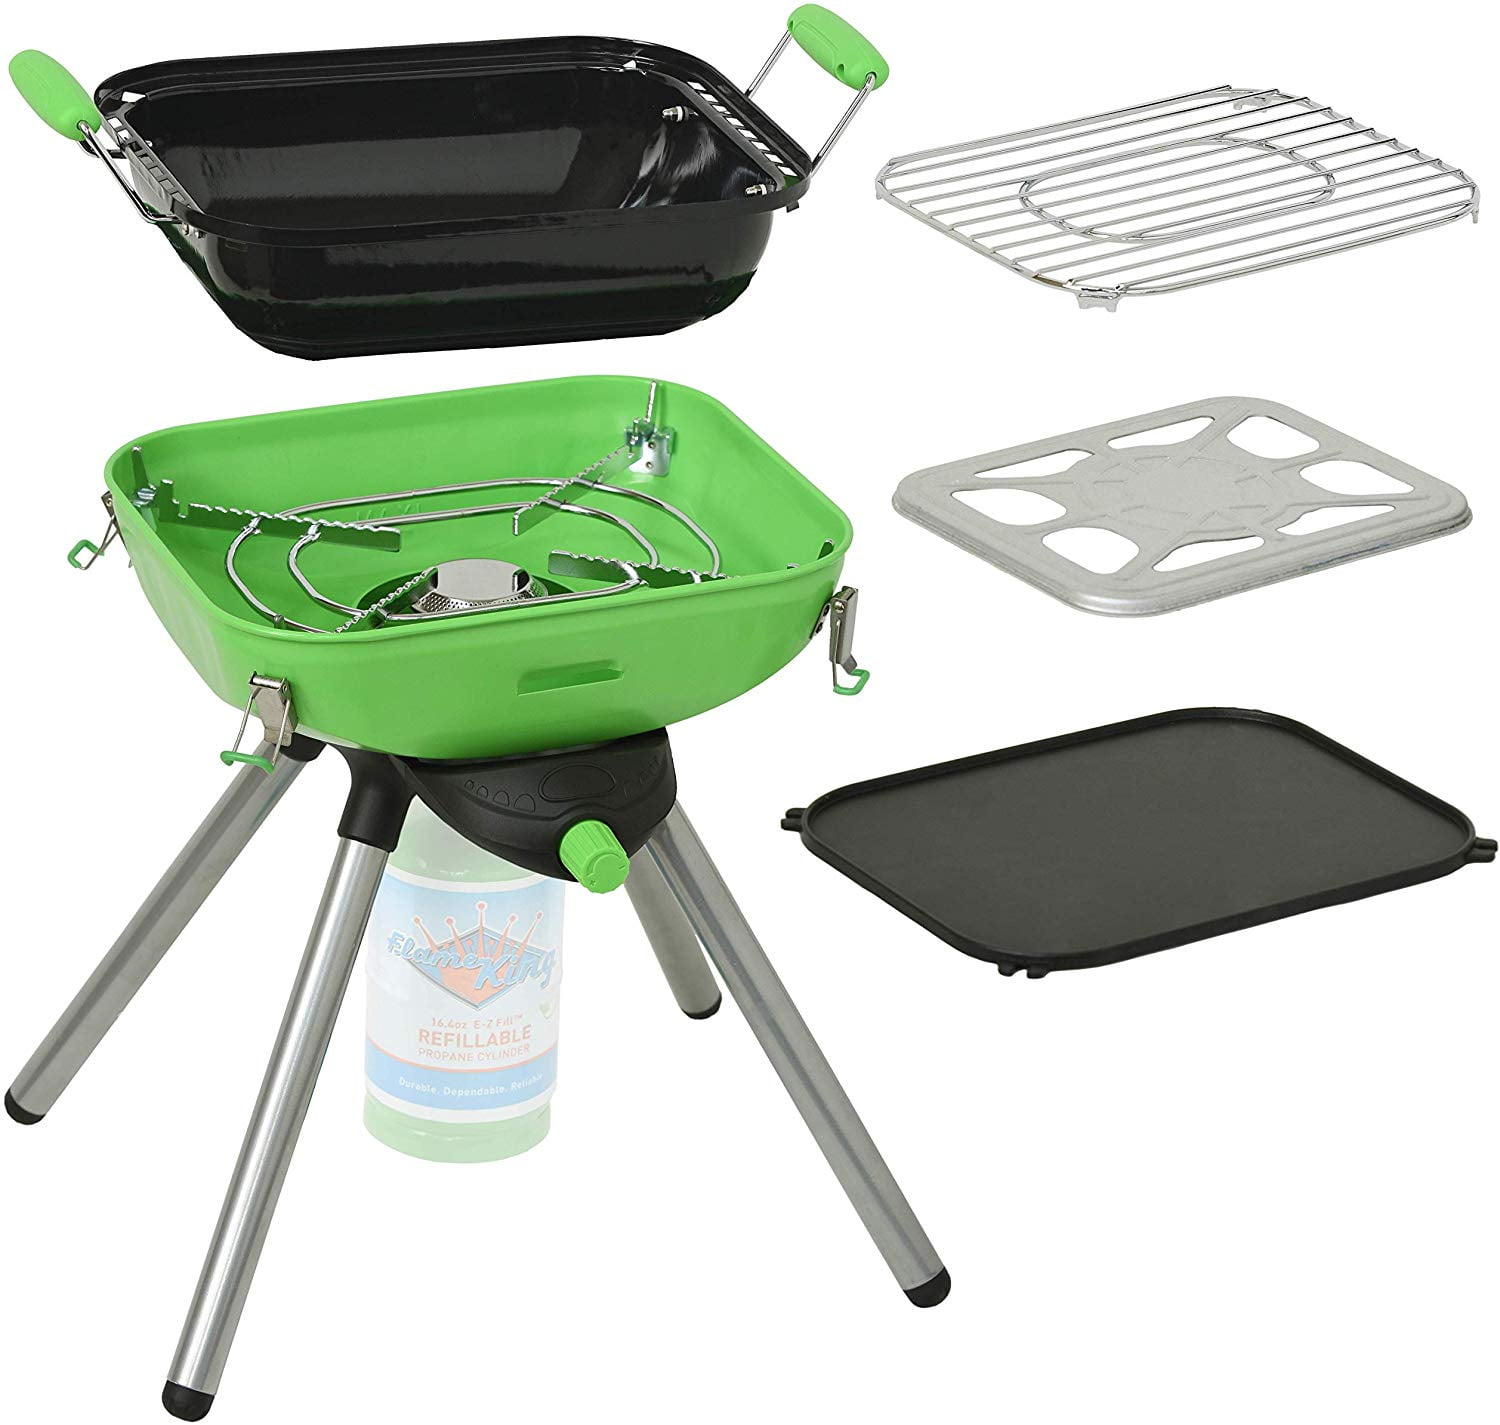 Camping Gas Barbecue Cooker Portable Grill BBQ Butane Stove 2200W Bag Apron Set 